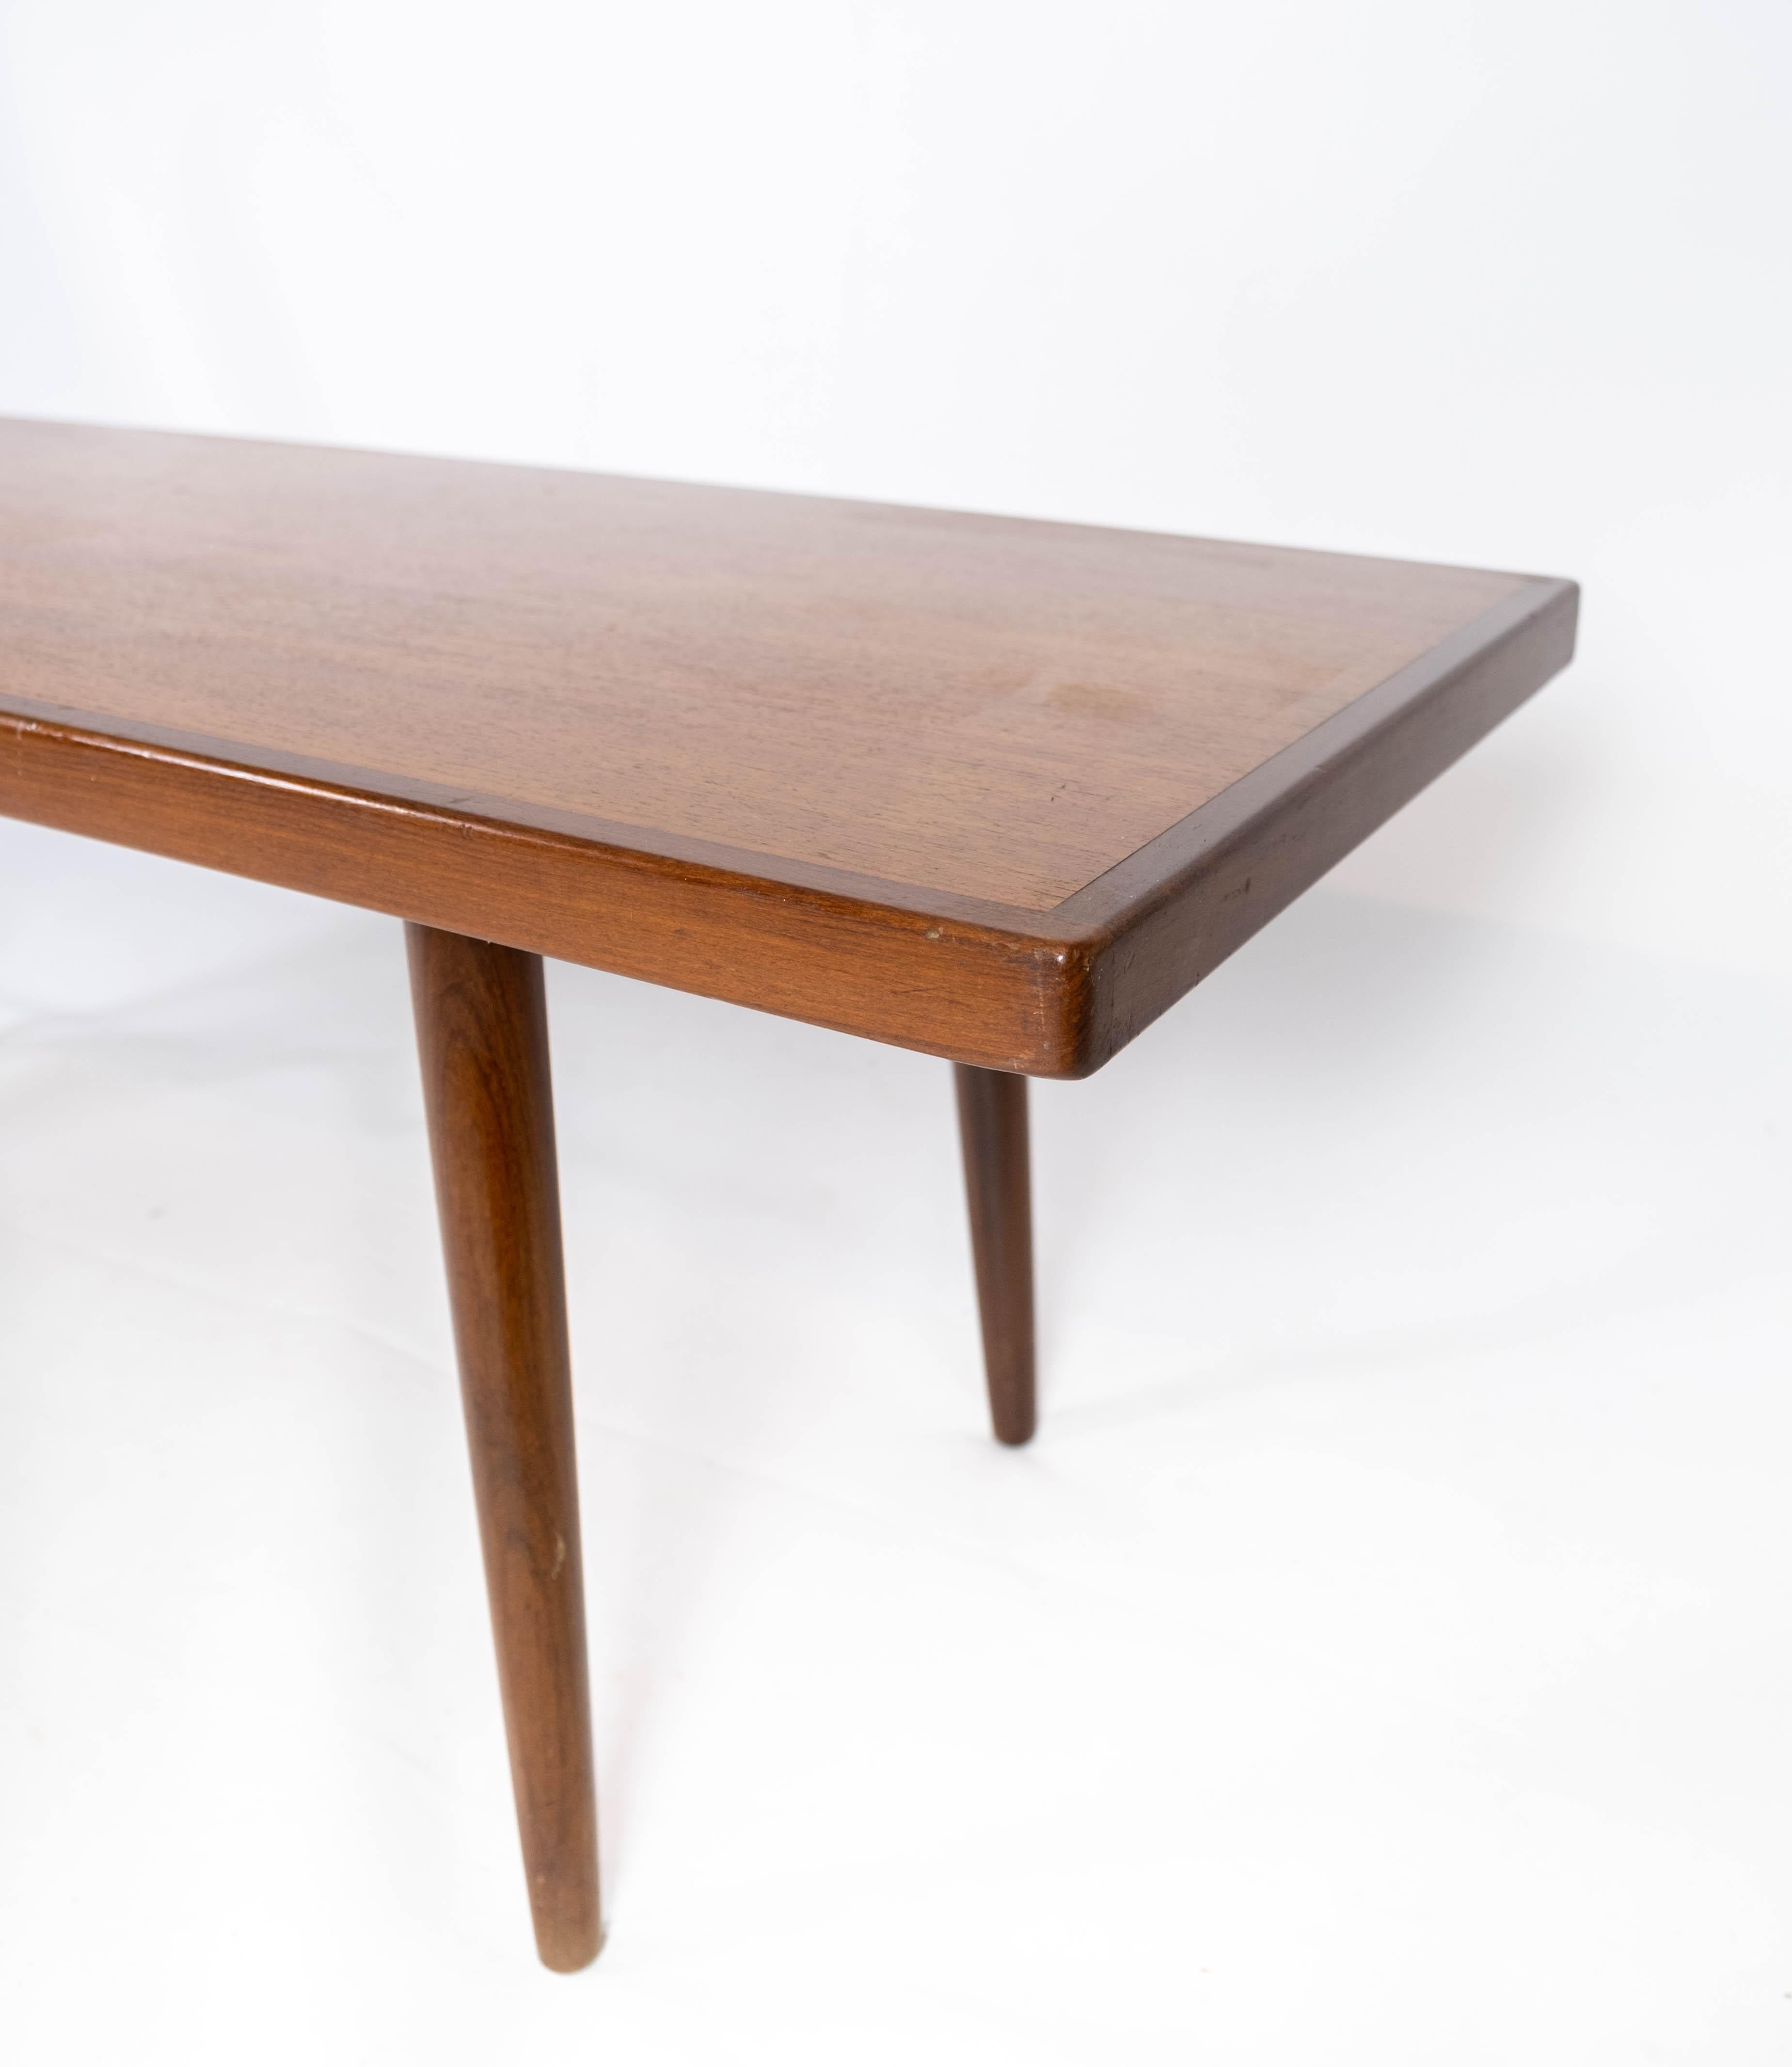 Mid-20th Century Coffee Table Made In Teak, Danish Design From 1960s For Sale